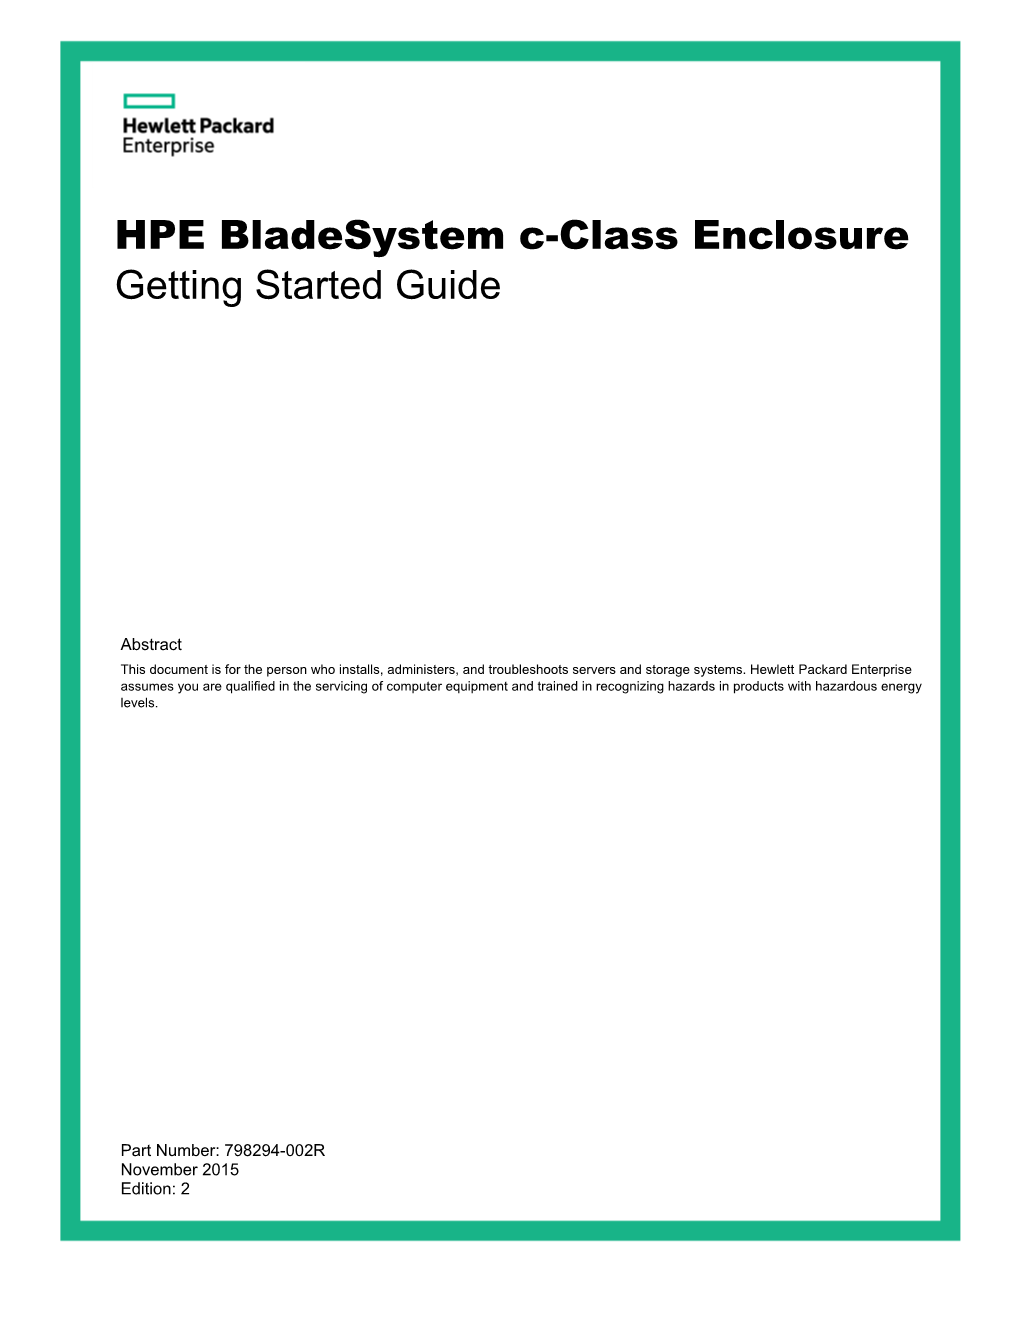 HPE Bladesystem C-Class Enclosure Getting Started Guide